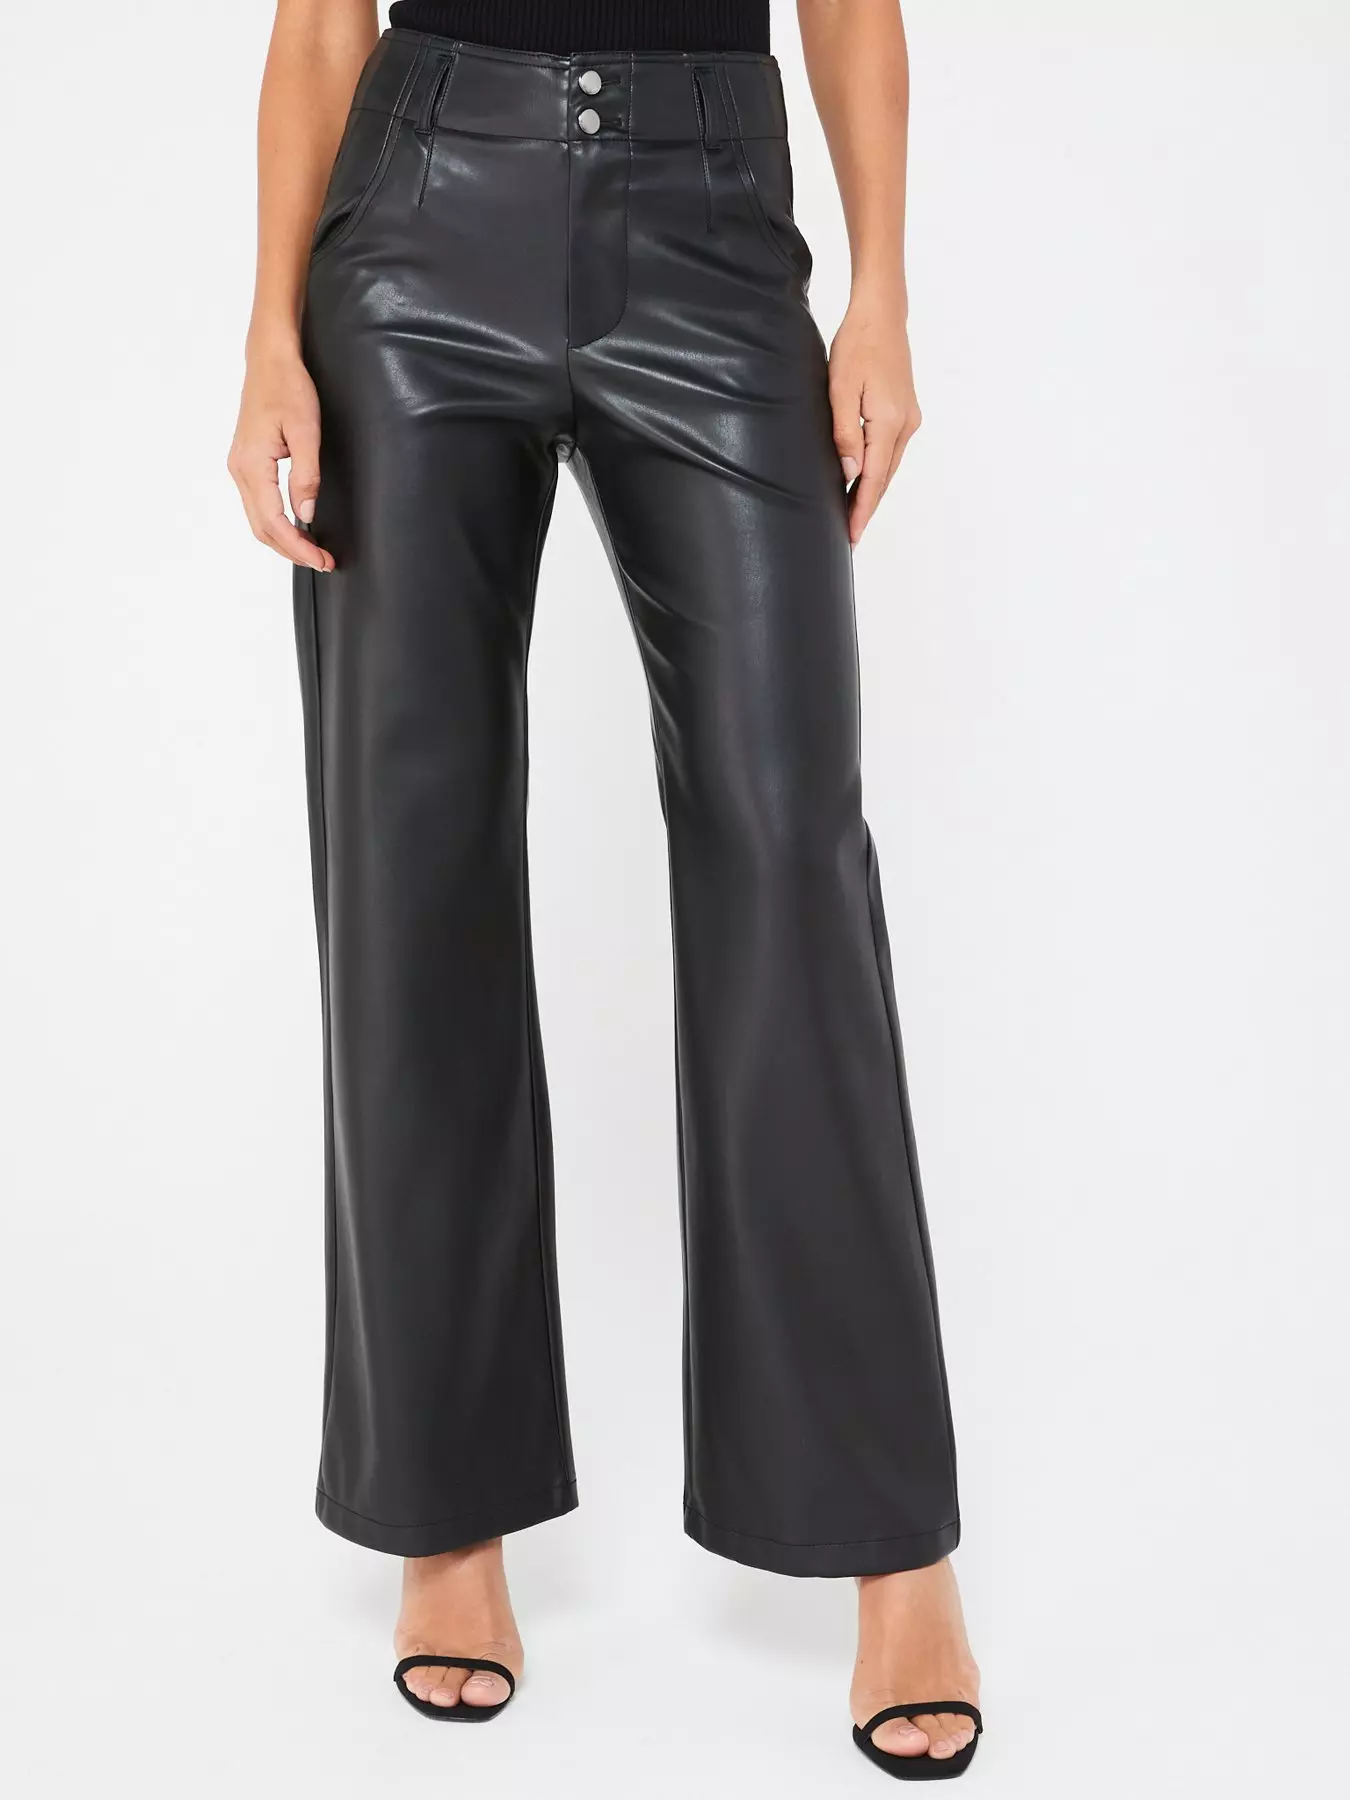 DKNY Flat Front Wide Leg Allover Pleated Pull-On Coordinating Pants